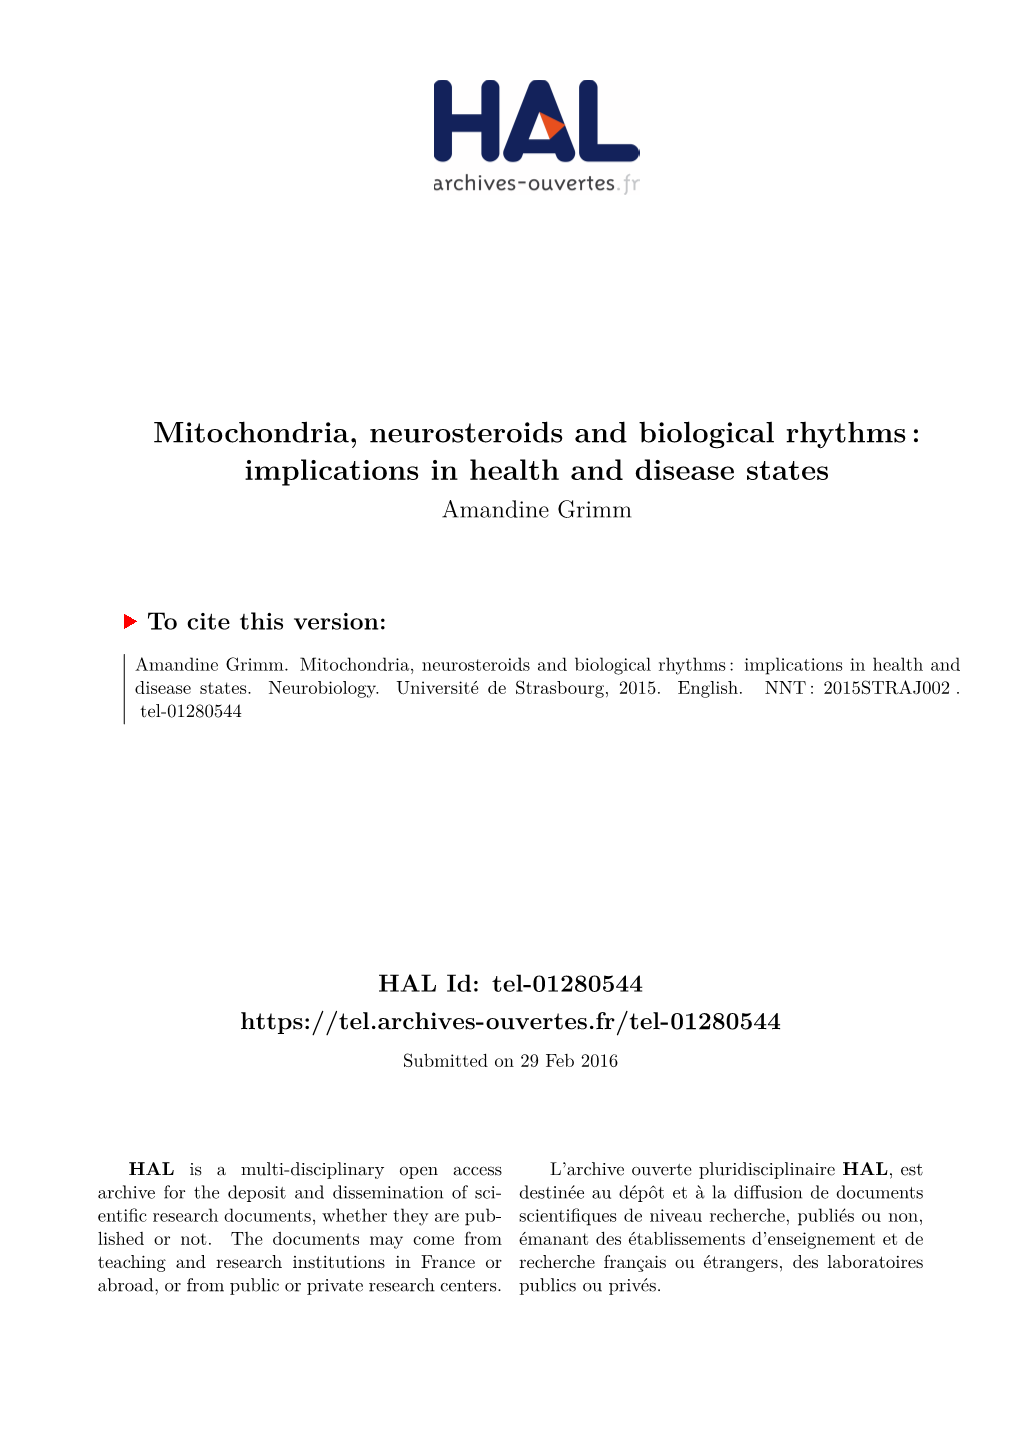 Mitochondria, Neurosteroids and Biological Rhythms: Implications in Health and Disease States